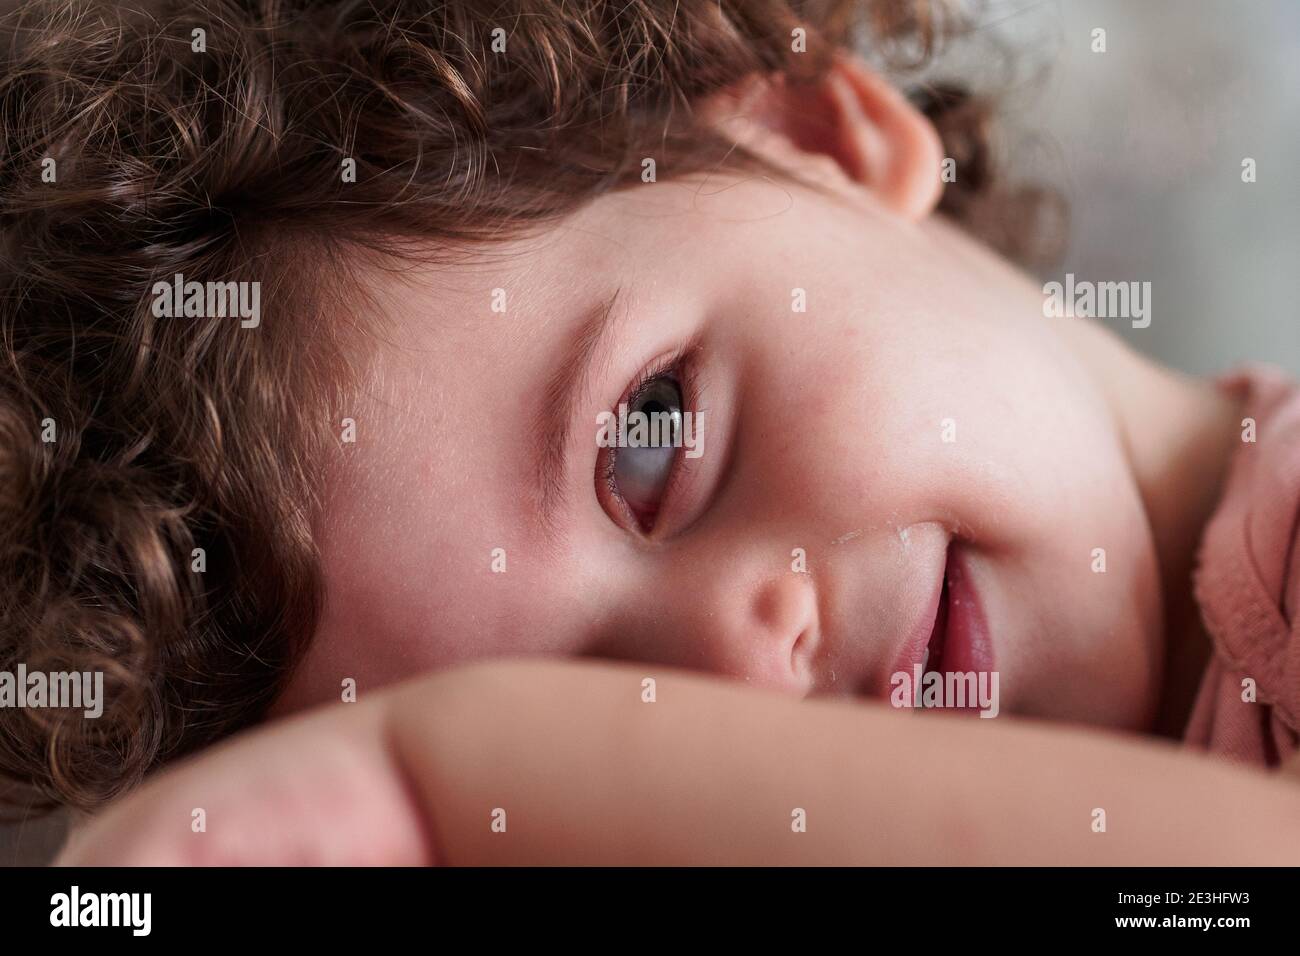 Bashful toddler hides her face behind her hand Stock Photo